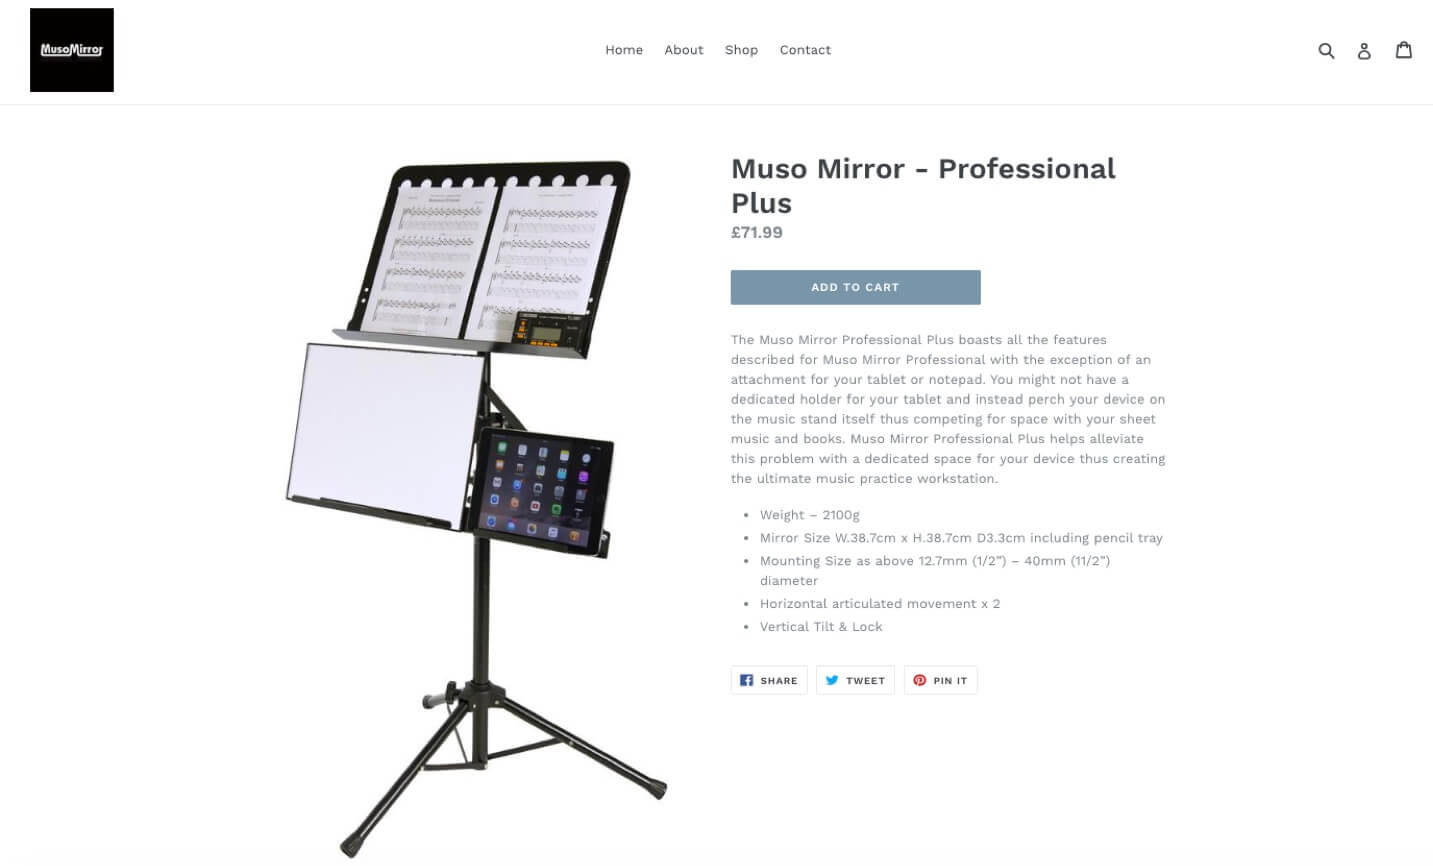 Product page - Muso Mirror eCommerce site